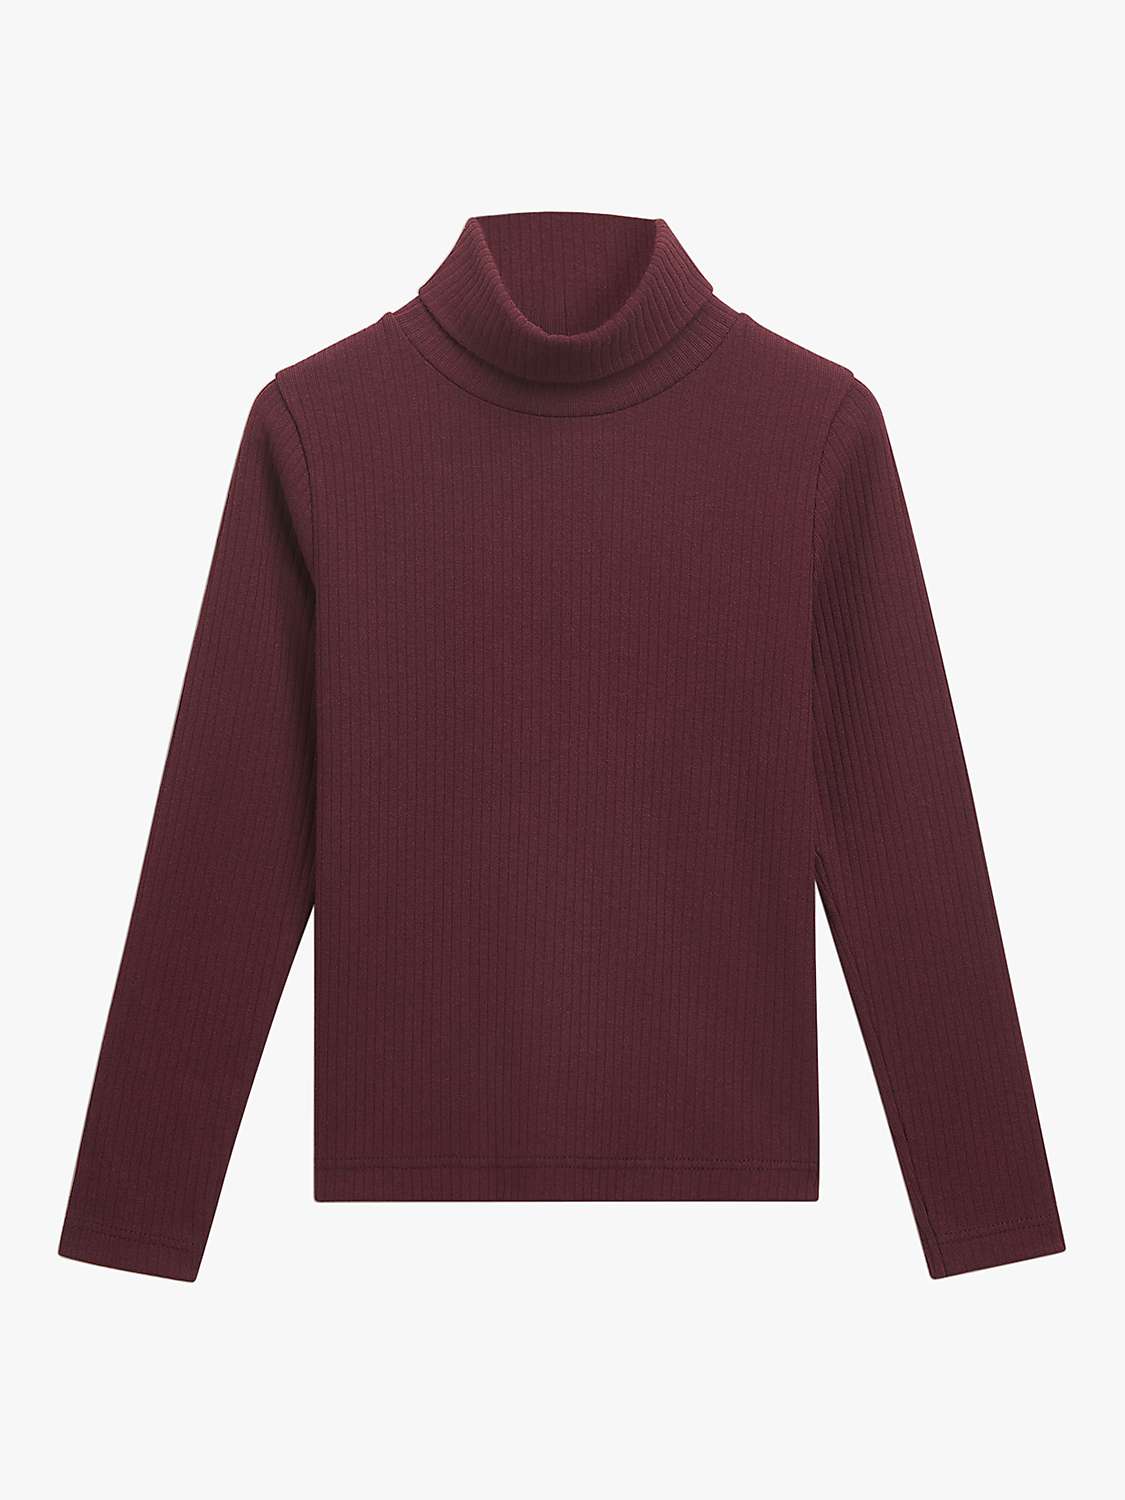 Buy Whistles Kids' Ribbed High Neck Top, Aubergine Online at johnlewis.com